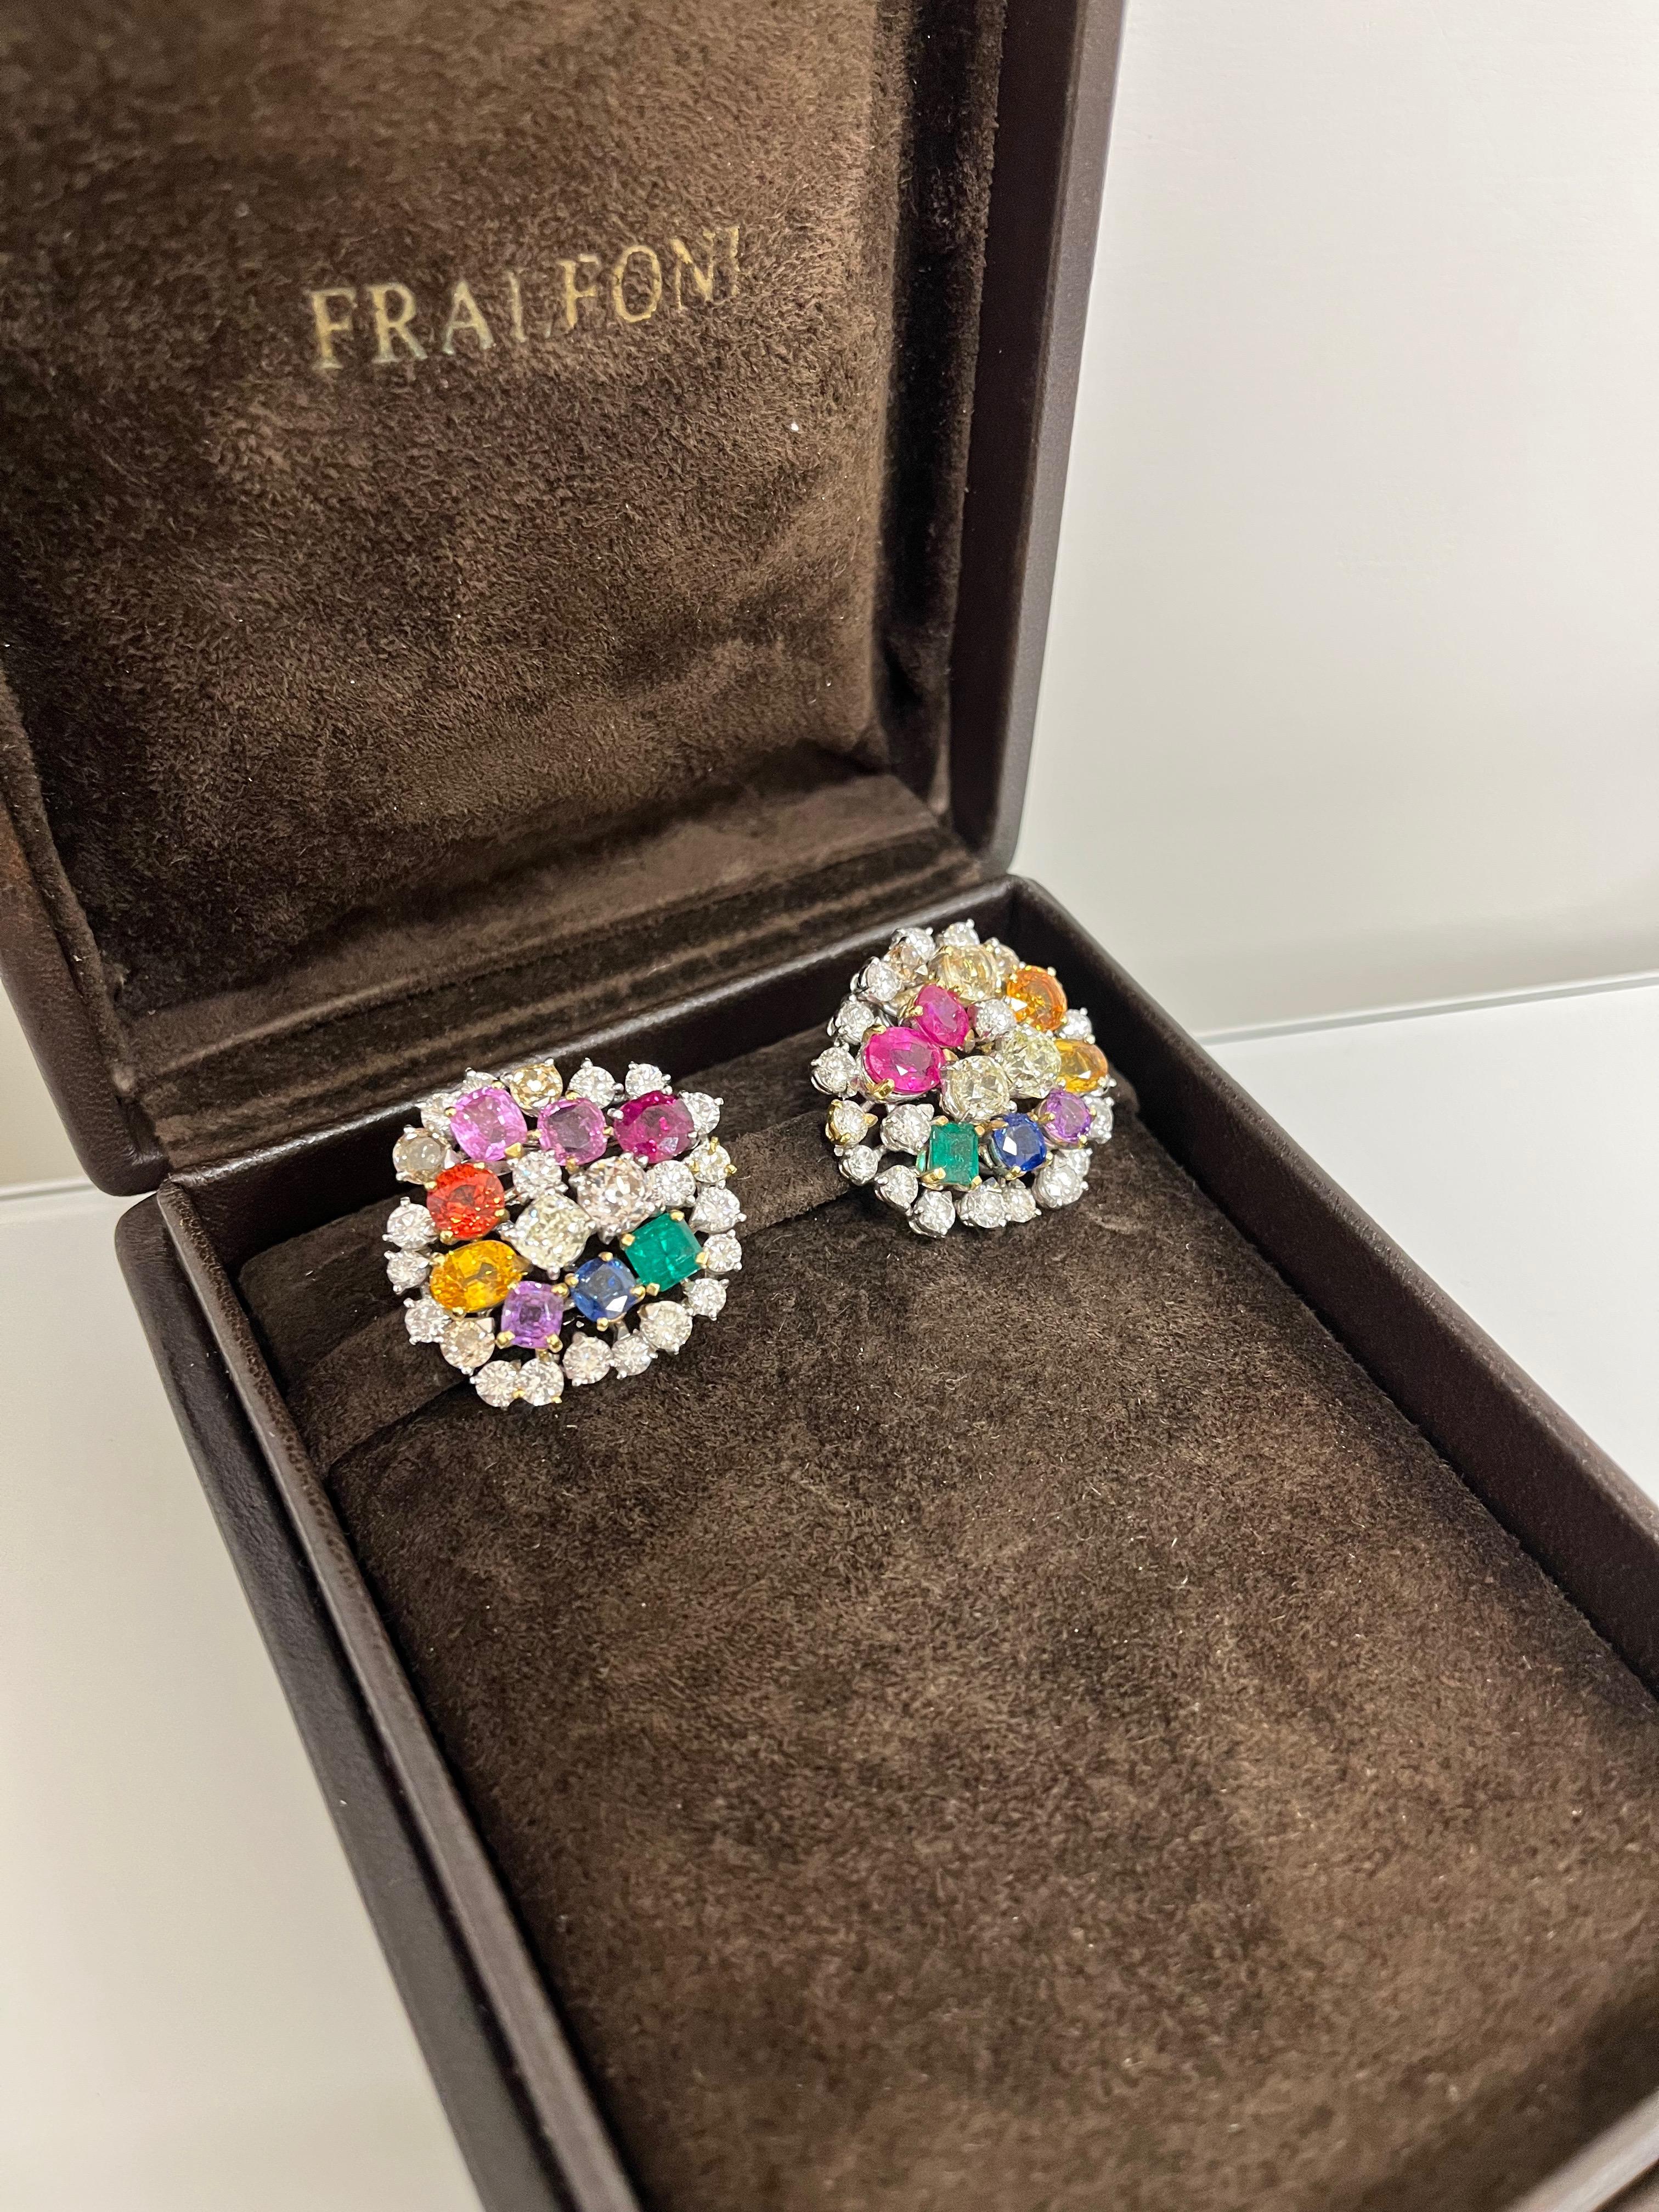 18 kt. white gold clip-on earrings with 6.20 carats of round-cut diamonds, 2.10 carats of brown round-cut diamonds, 3.90 carats of old mine cut diamonds and 20.10 carats of rubies, emeralds and multicolored sapphires.
The total weight of the